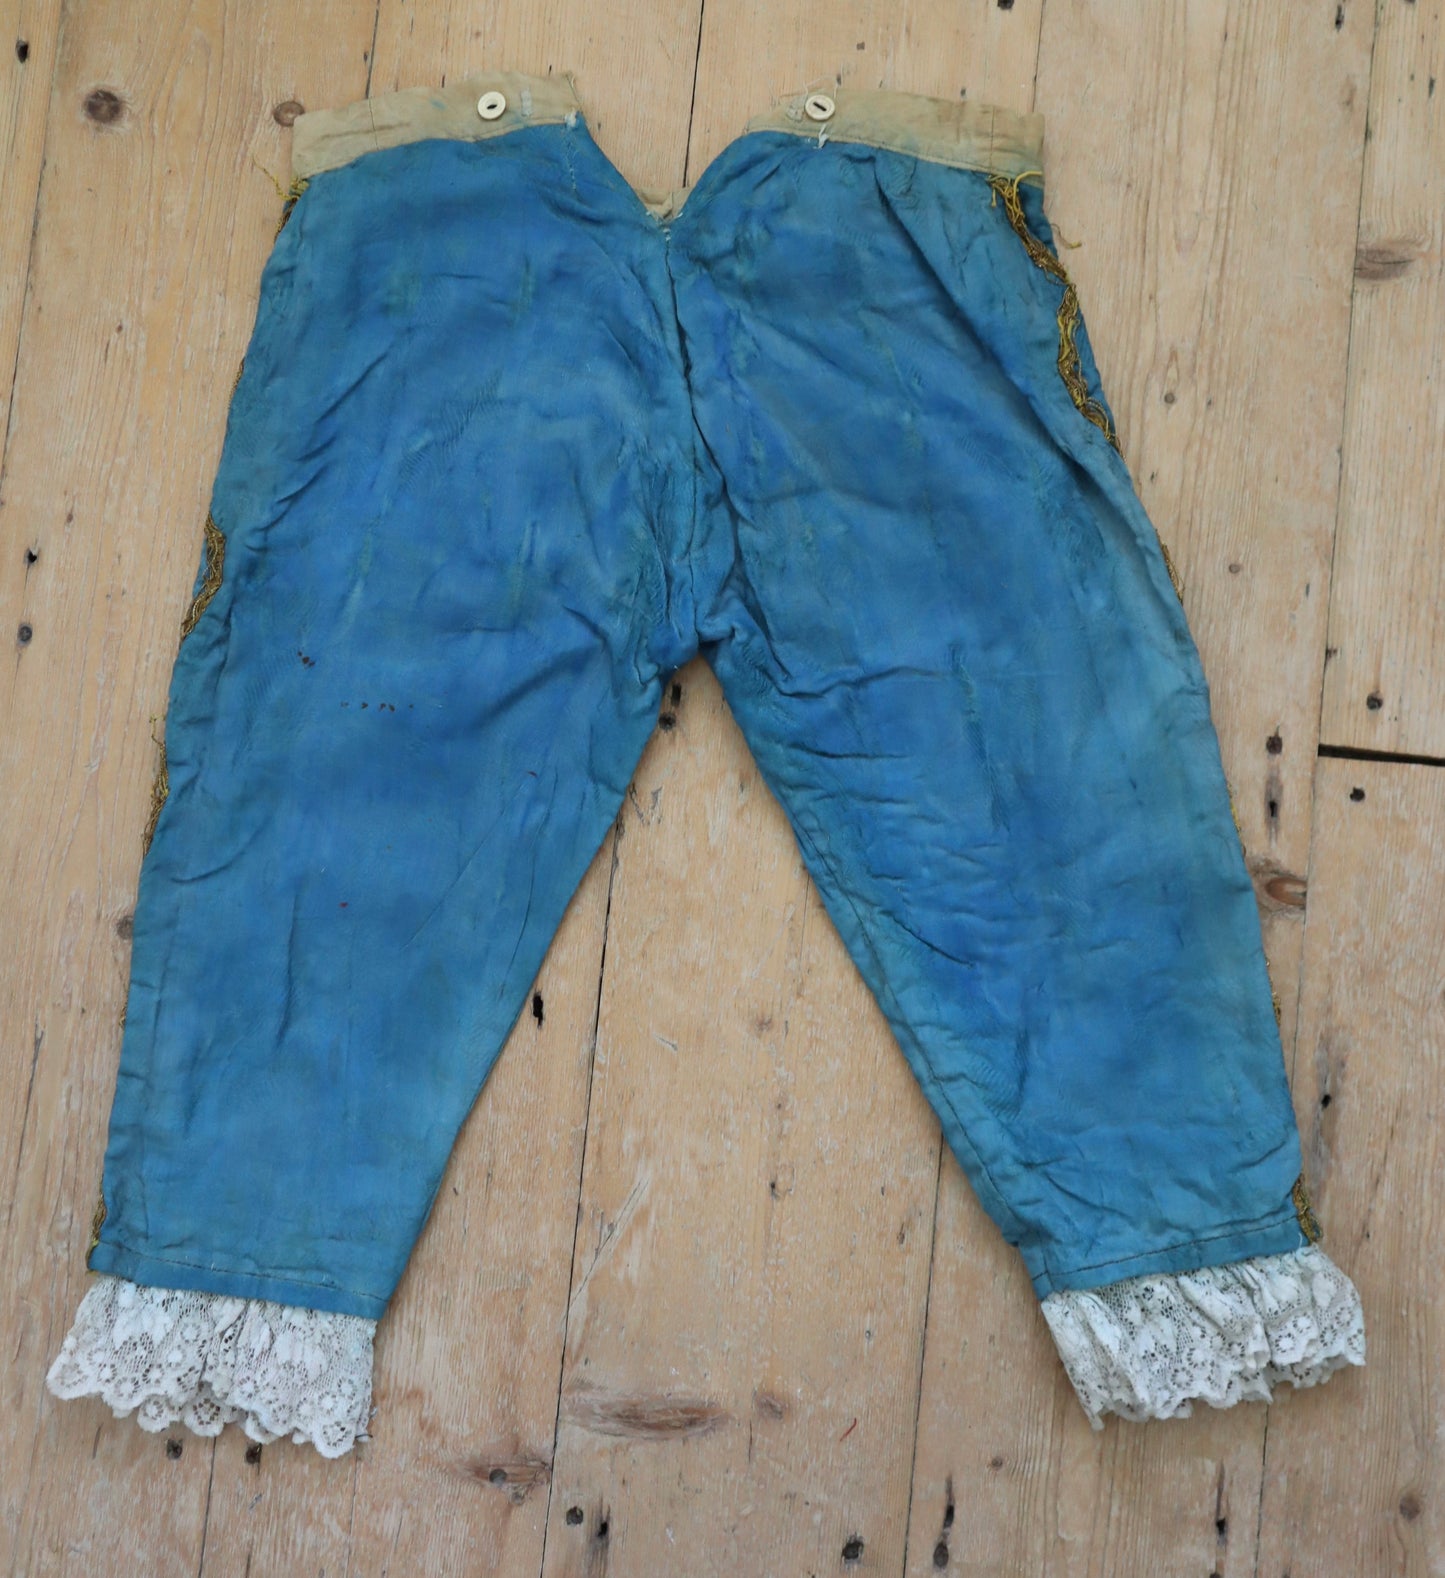 Antique French 19th Century Woven Cotton Blue Renaissance Style Breeches Trousers Pants Gold Metal Ribbon Lace Trim Theatre Opera Costume